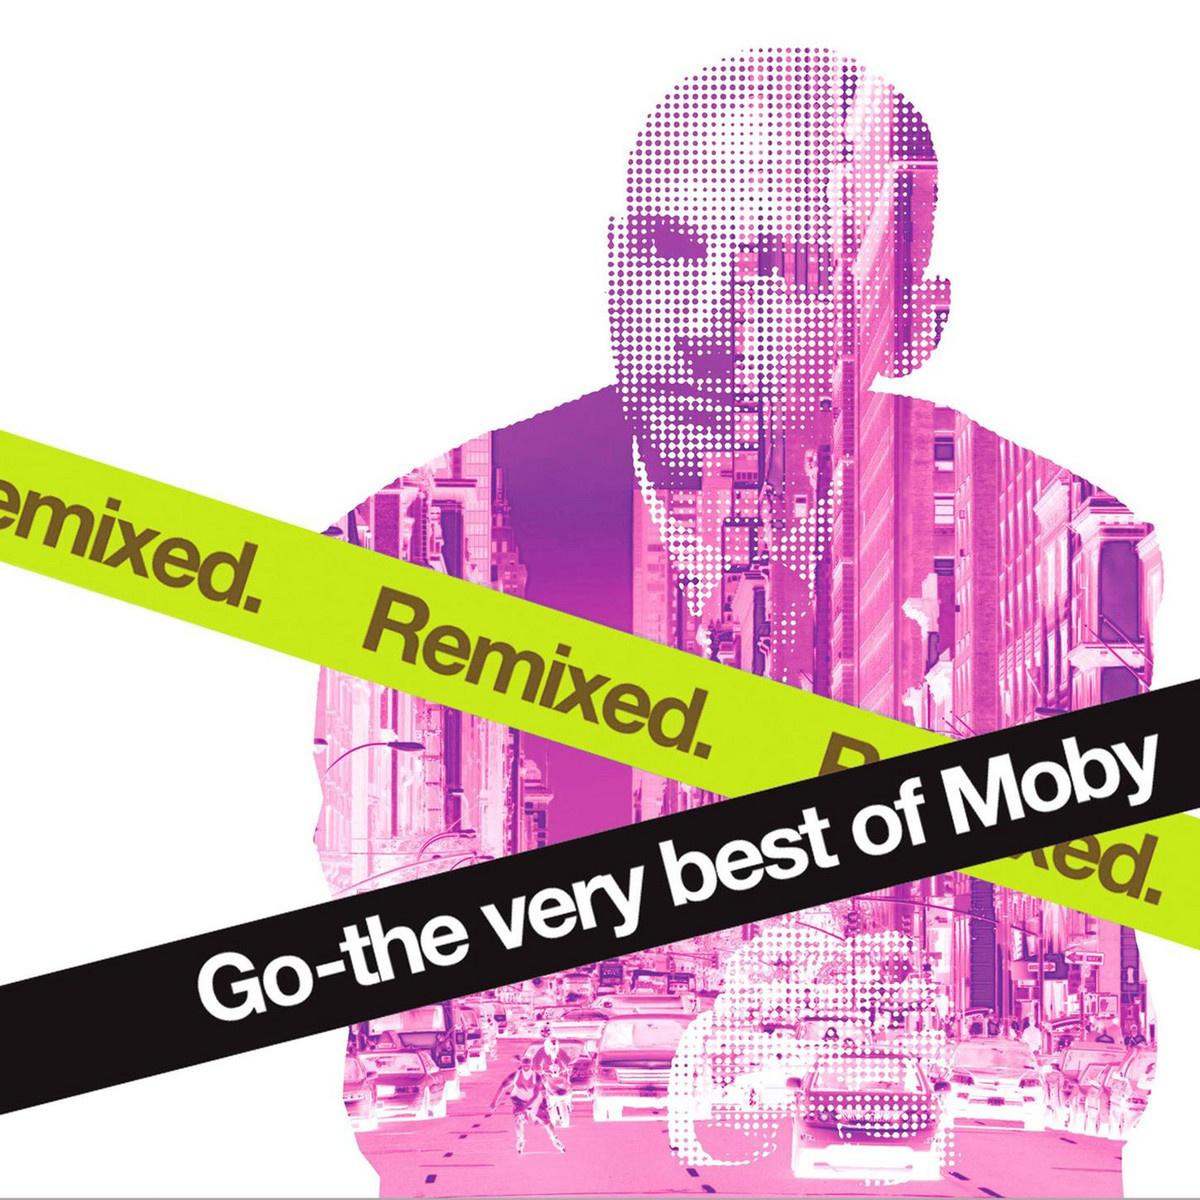 Go - The Very Best Of Moby Remixed专辑